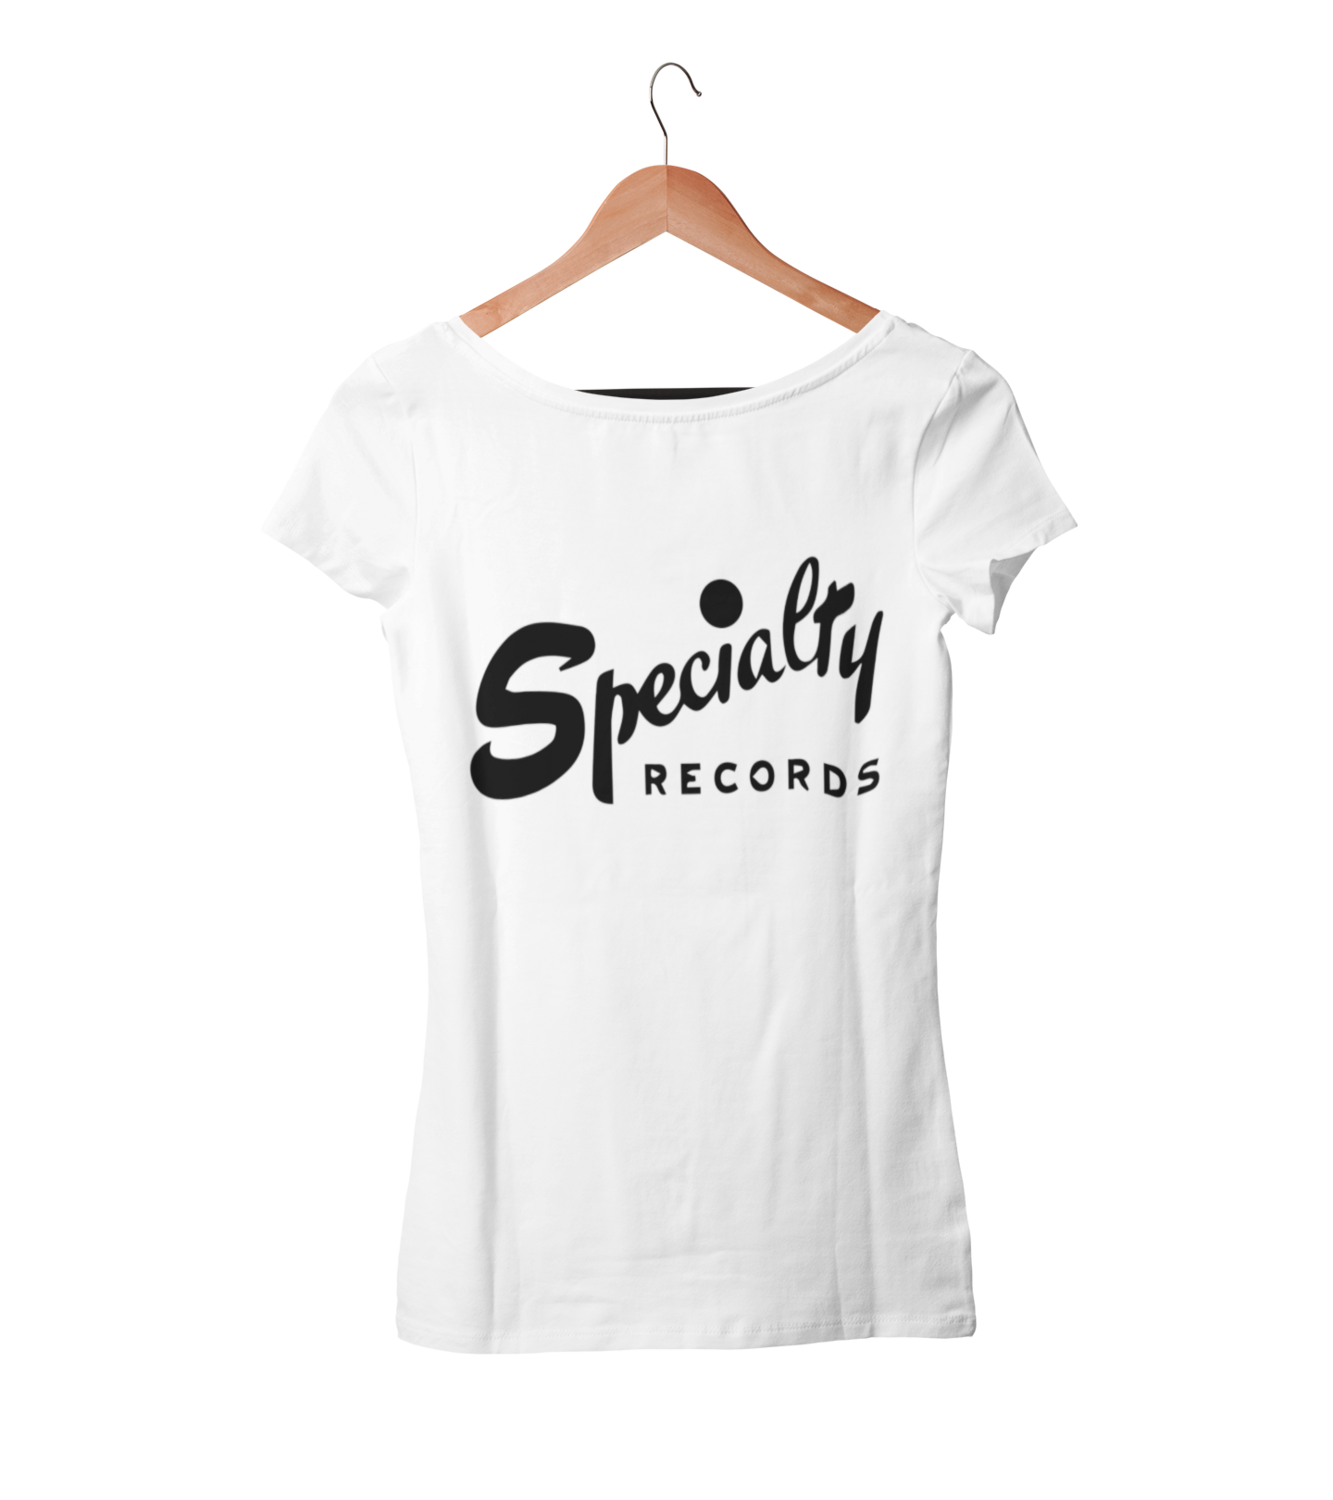 SPECIALITY RECORDS T-SHIRT WOMAN